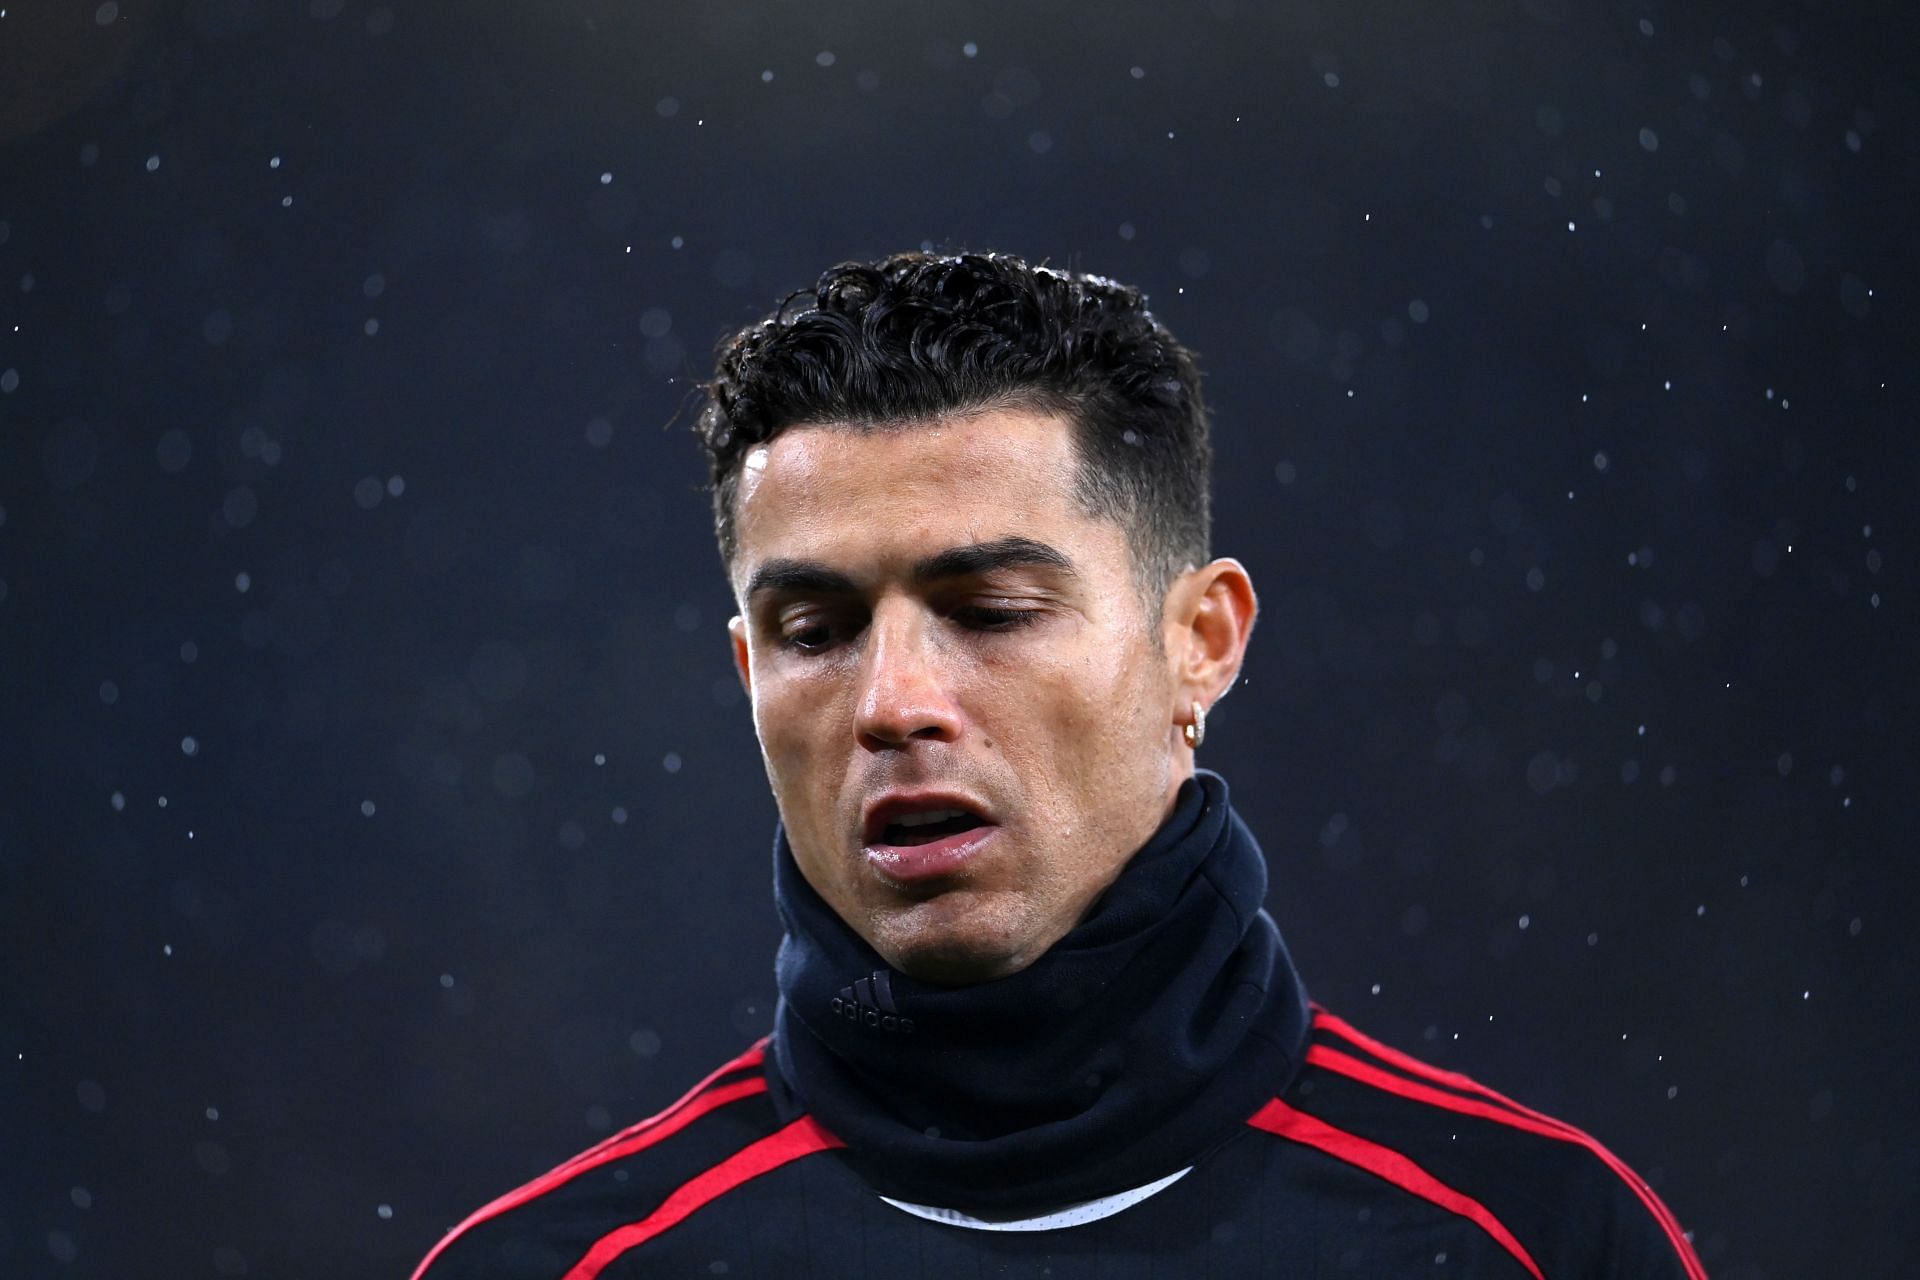 Luke Chadwick has said that Cristiano Ronaldo (in pic) is unhappy at Manchester United.